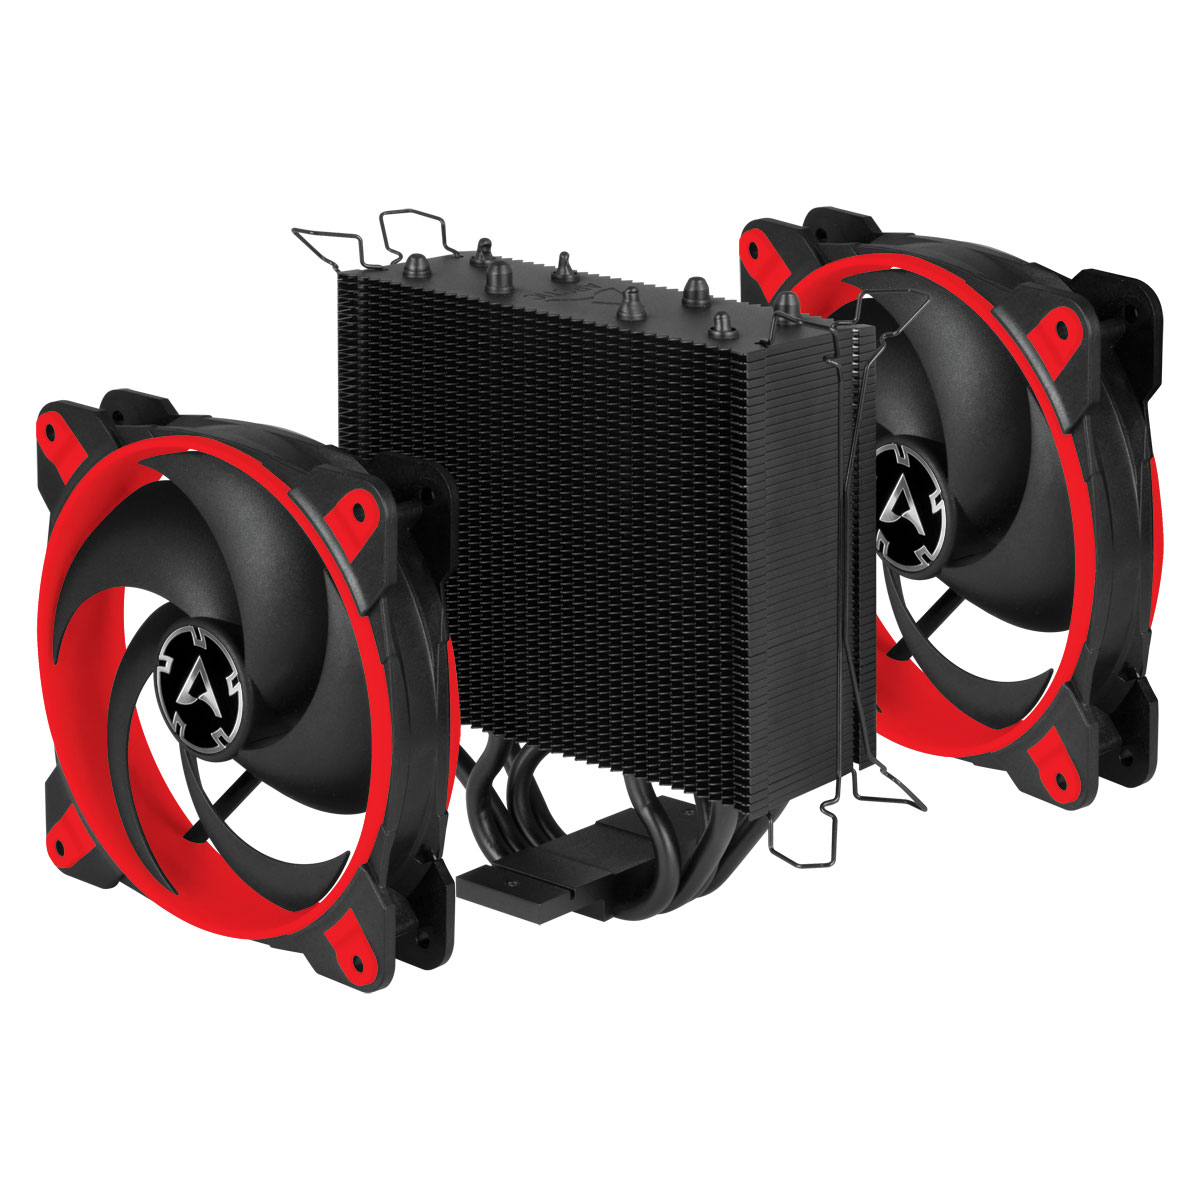  Arctic Cooling Freezer 34 eSports DUO Red (ACFRE00060A)